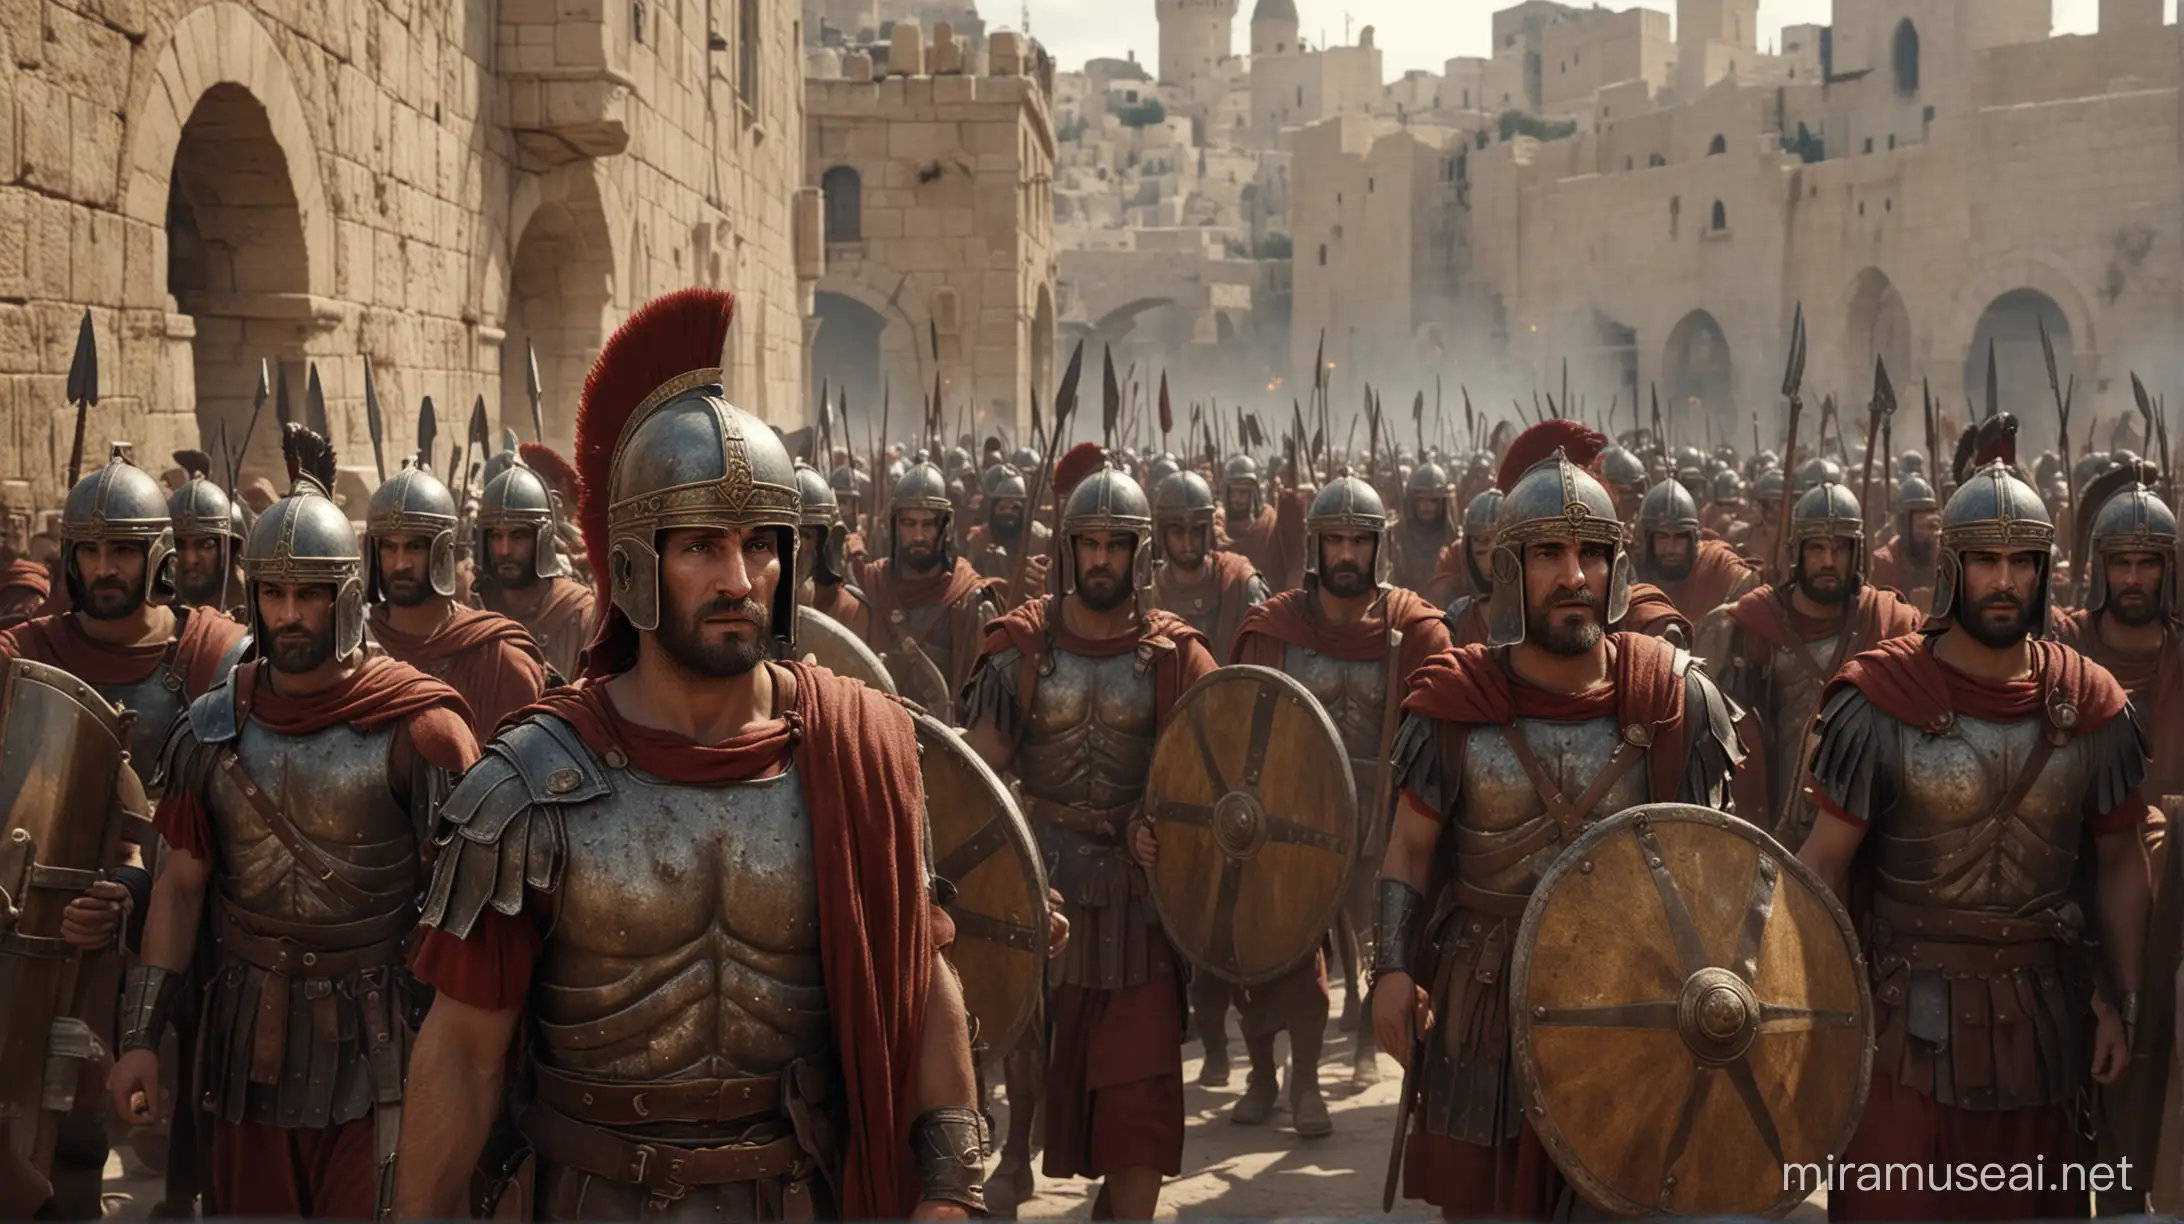 image of Roman soldiers in Jerusalem from the 1st century. 6k resolution, more realistic, based on the movie The Passion of the Christ.